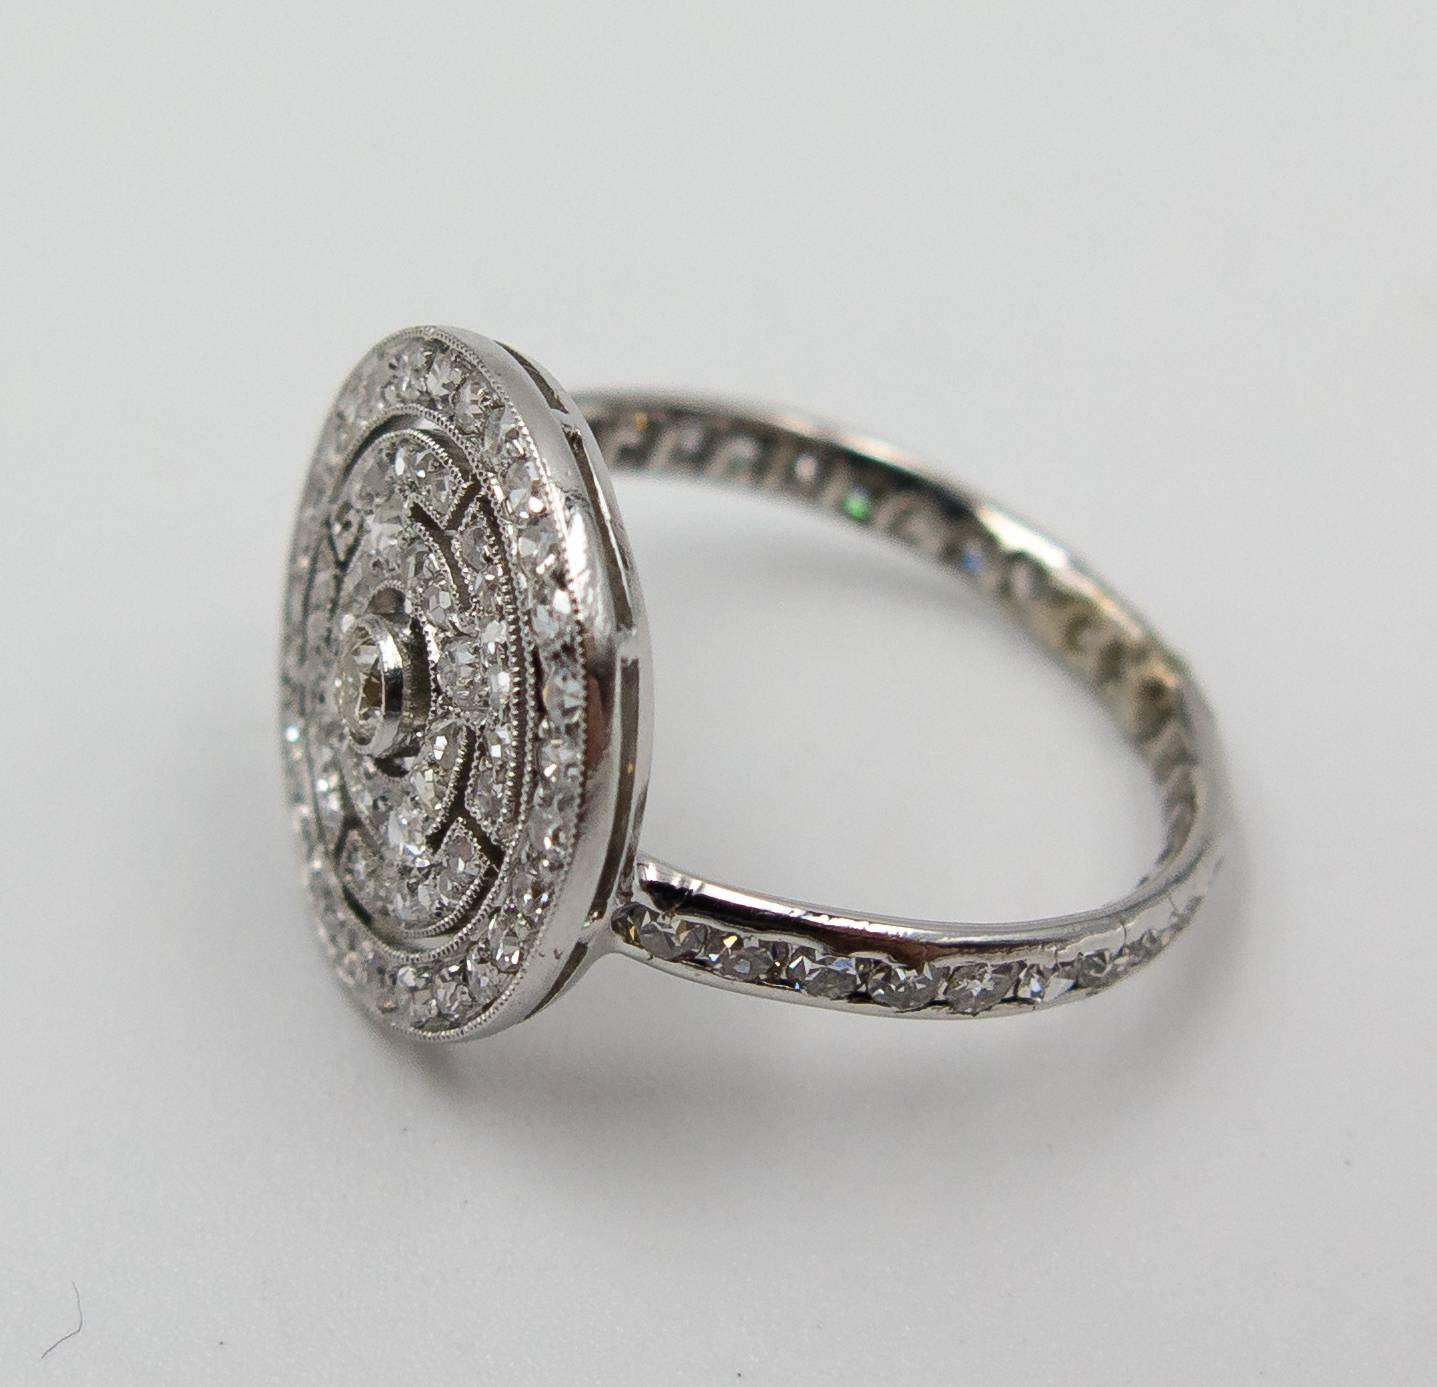   A subtle and wearable ring fitting flush against the skin, this unique little piece consists of a mandala shaped motif pave set with petite diamonds.   The ring is a size 5 1/2, and we like the unusual touch of the diamond shank as a base for the